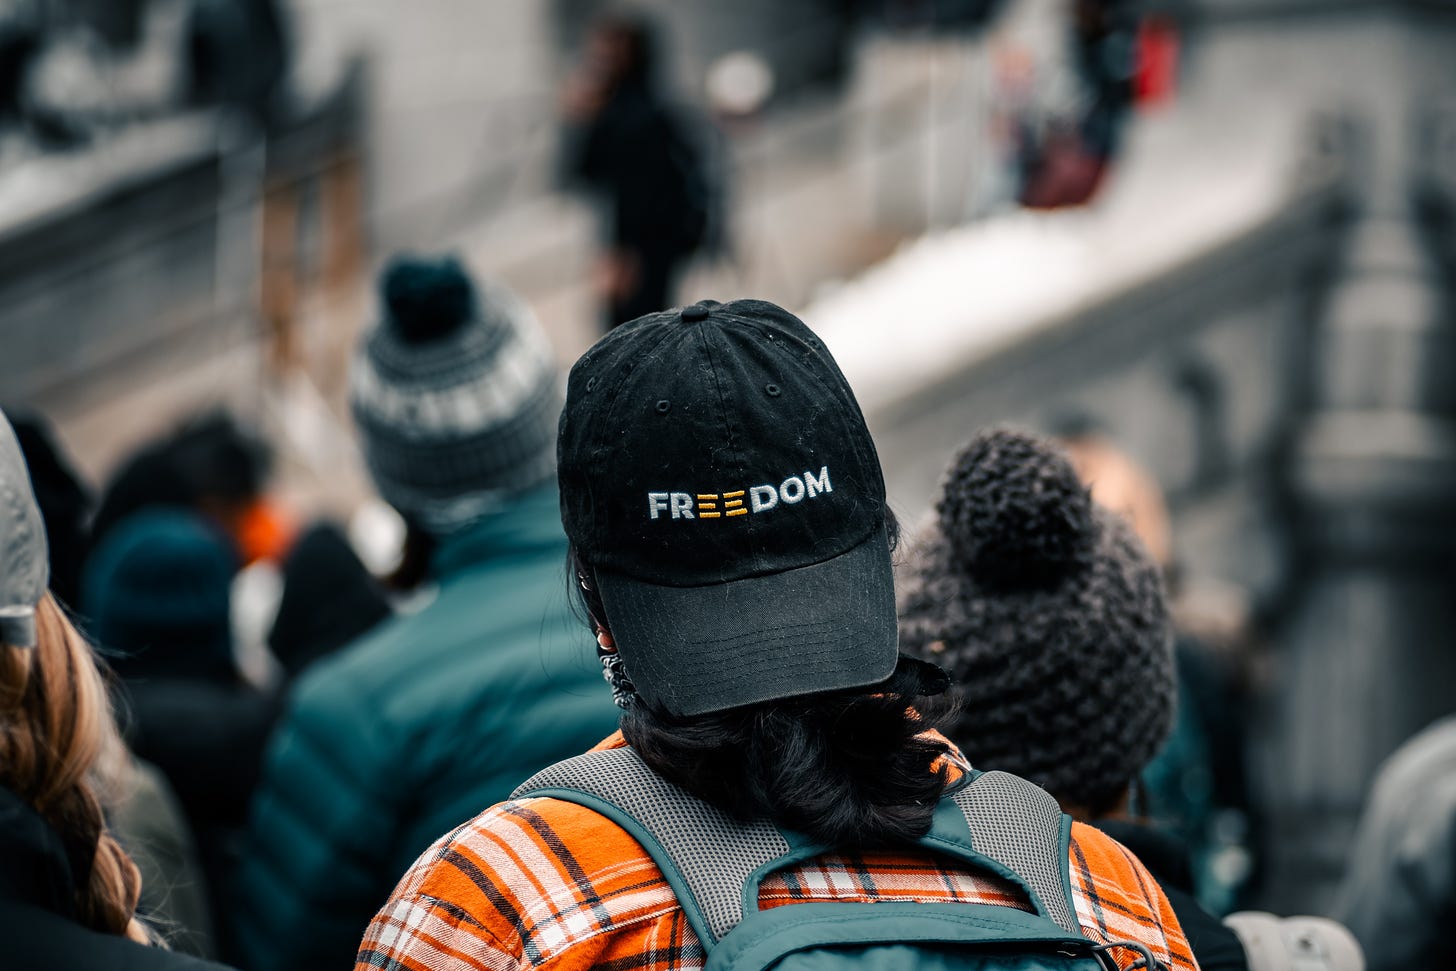 A photo of a person wearing a hat backwards, which says FREEDOM on it.